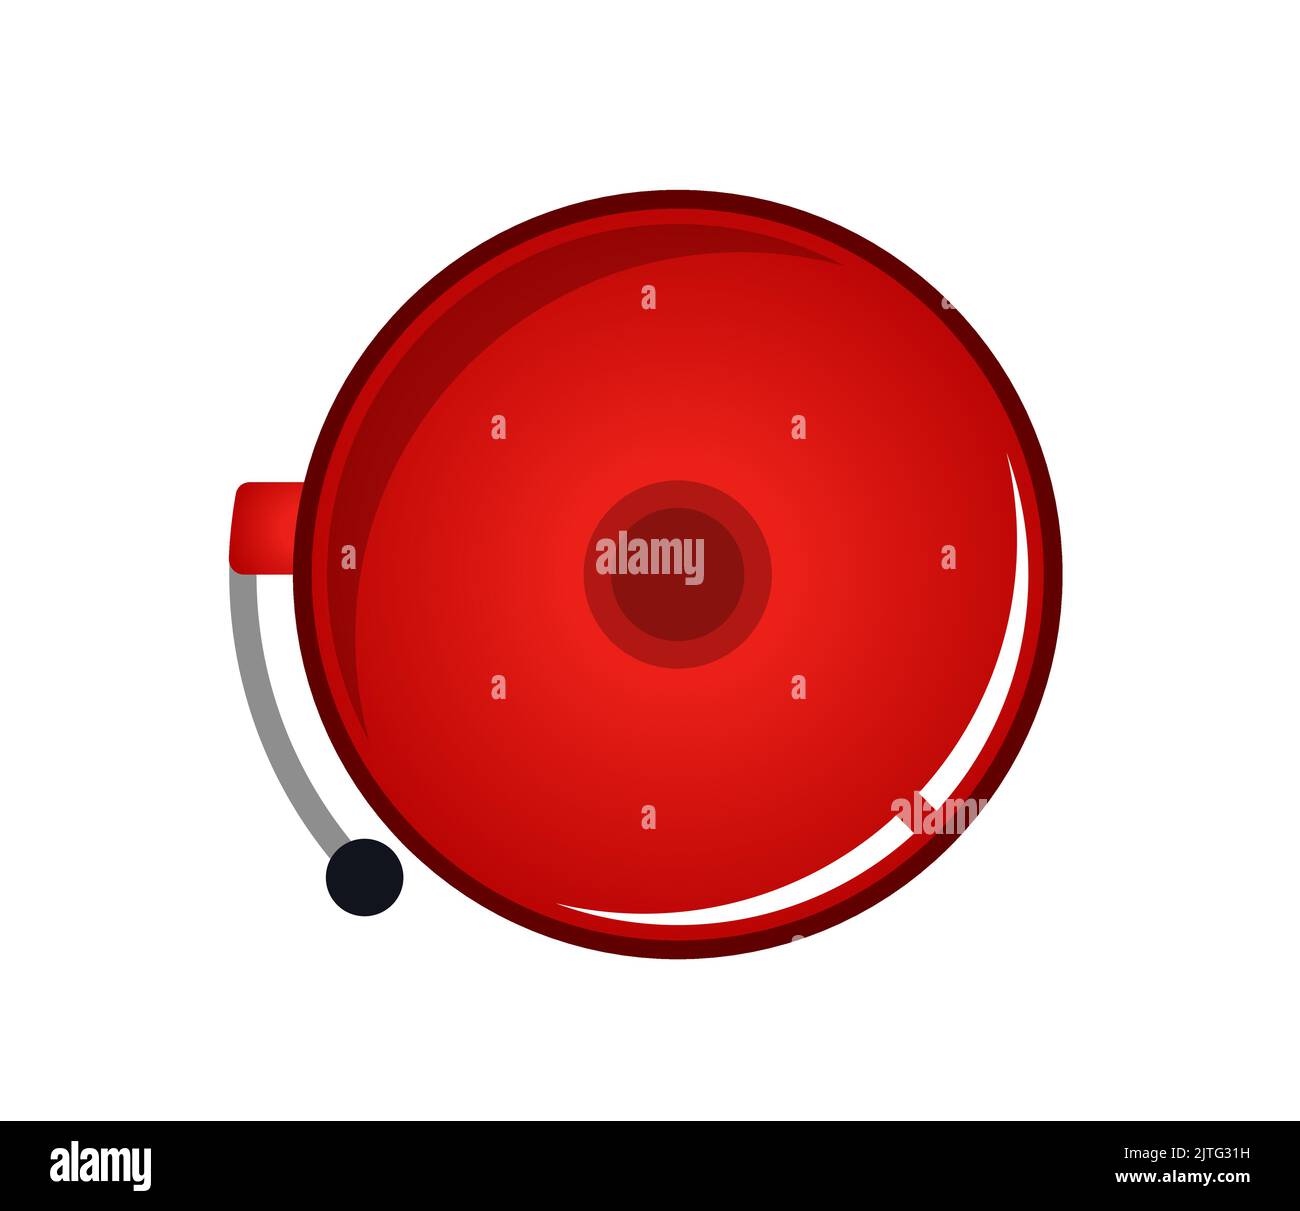 Fire Alarm Bell - Stock Icon as EPS 10 File Stock Vector